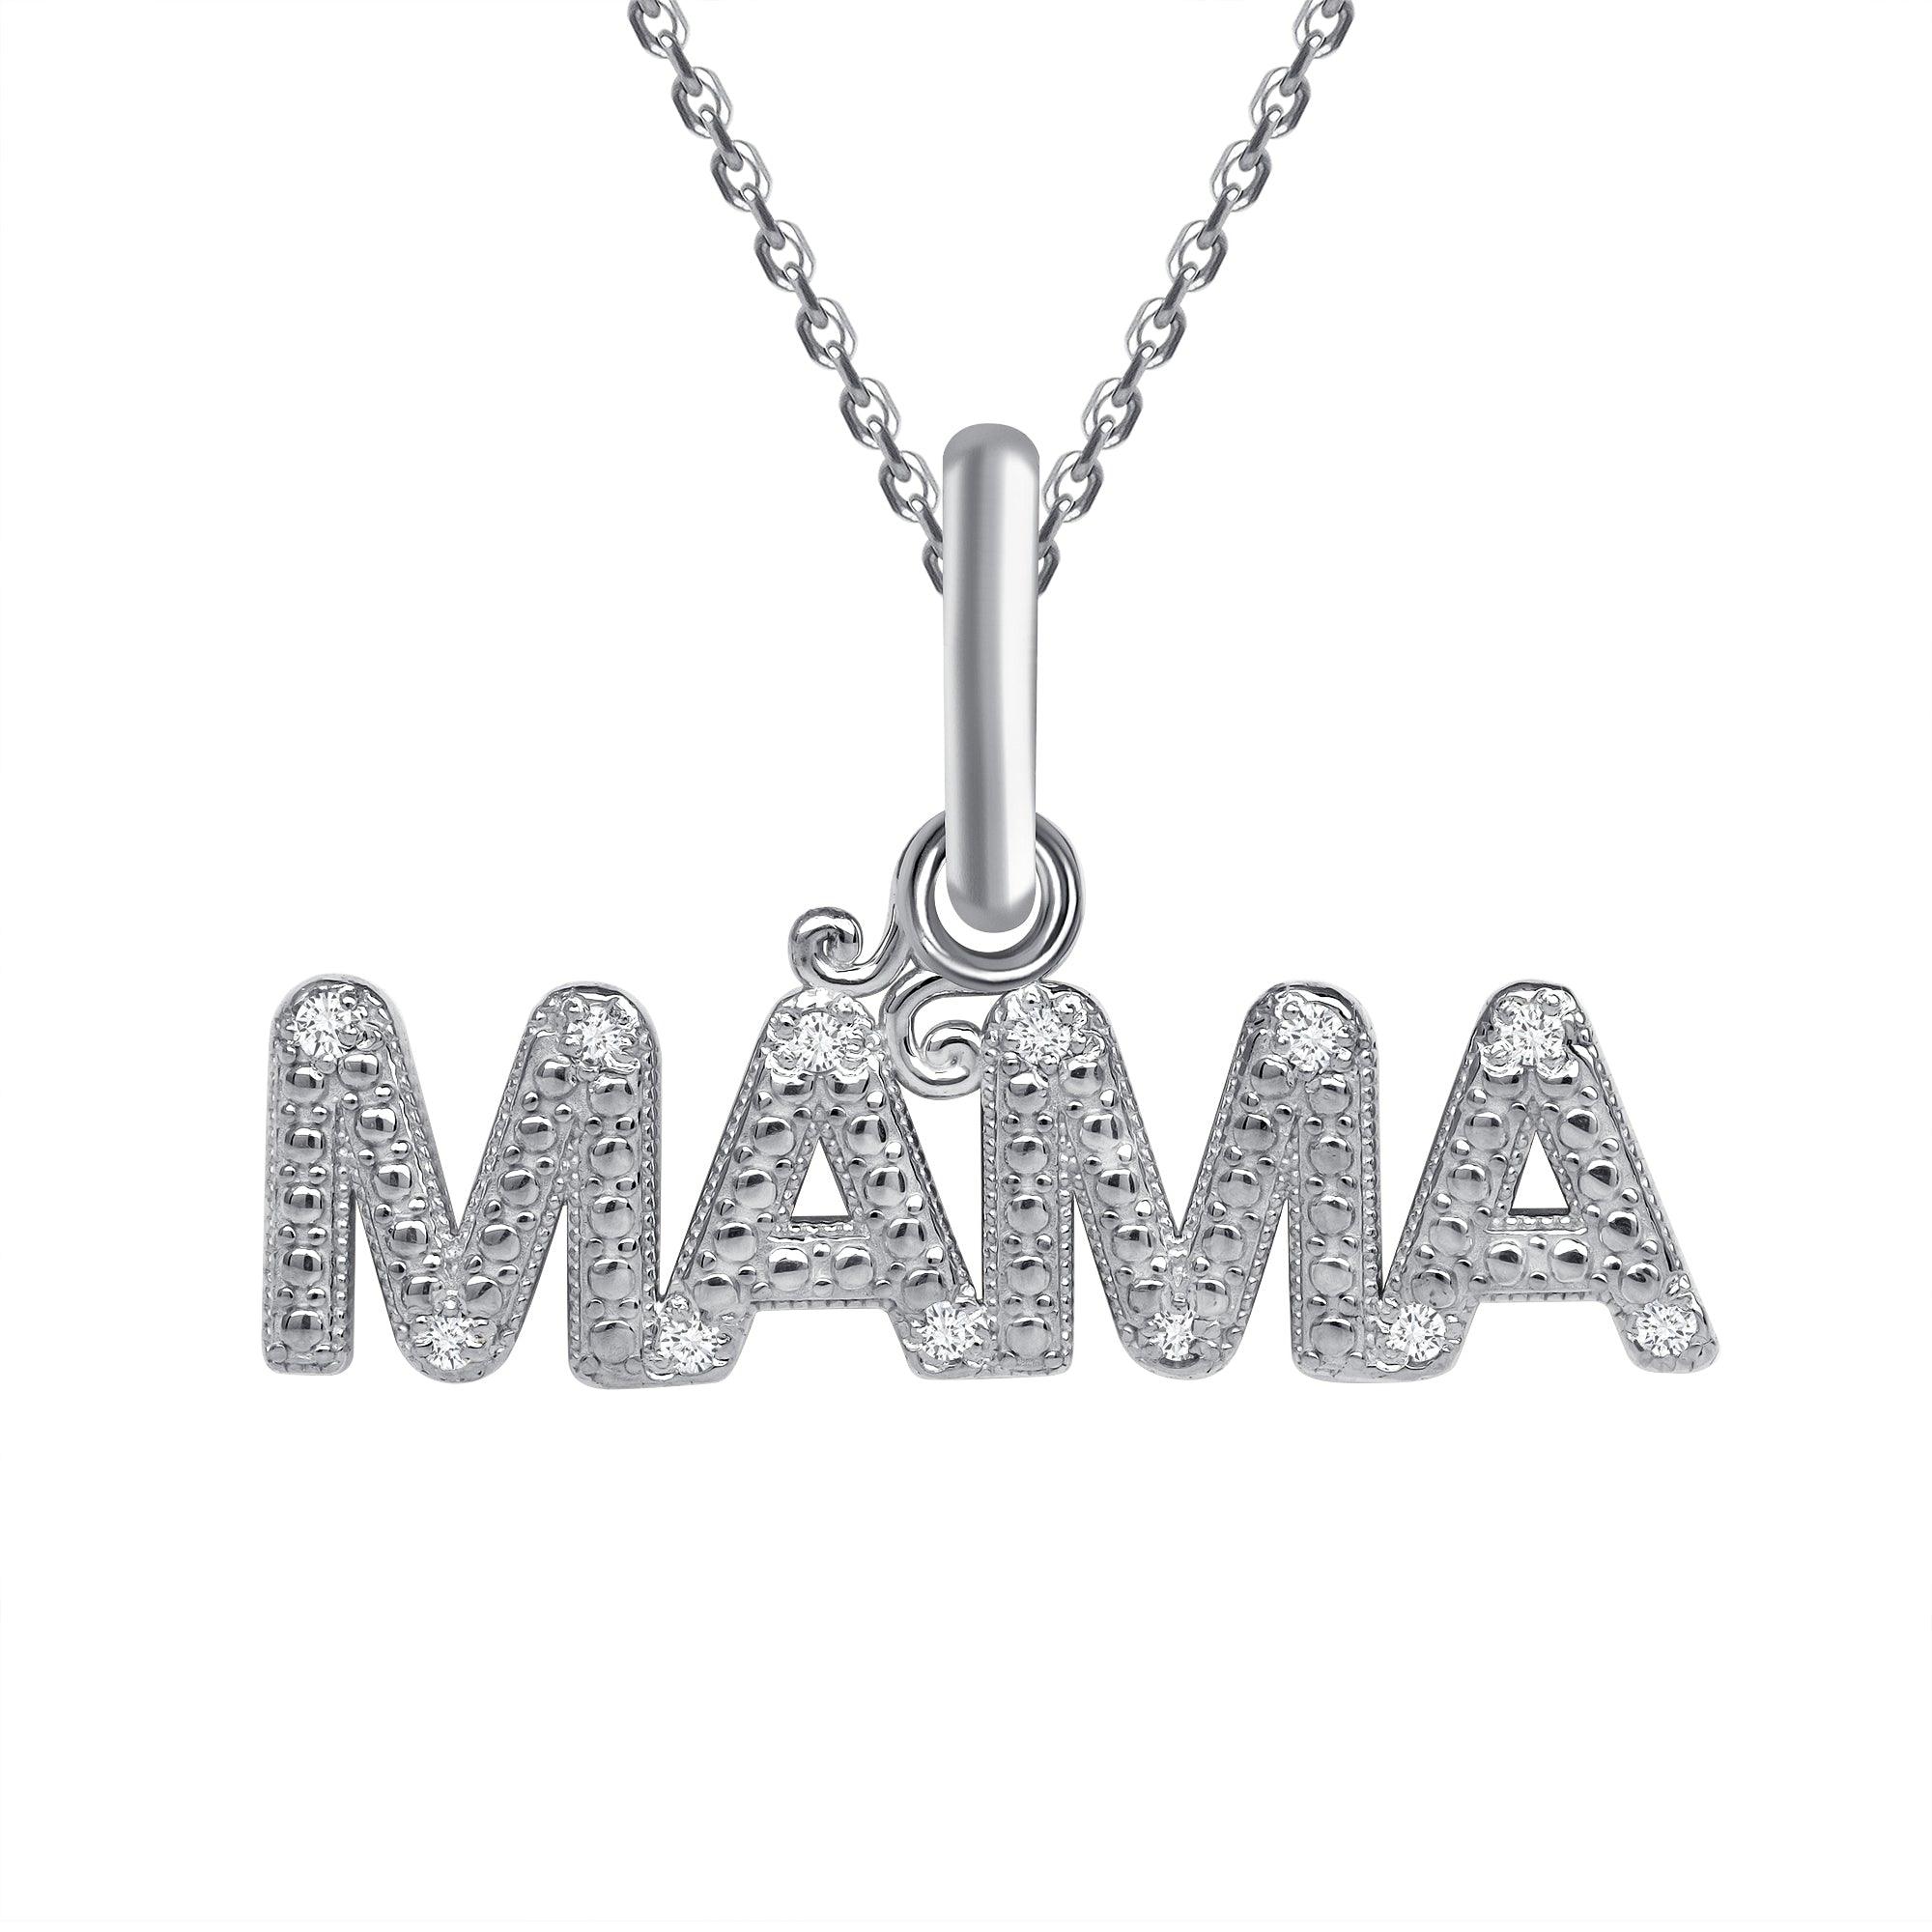 "MAMA" Pendant Necklace with Diamond Accents from Rafi's Jewelry